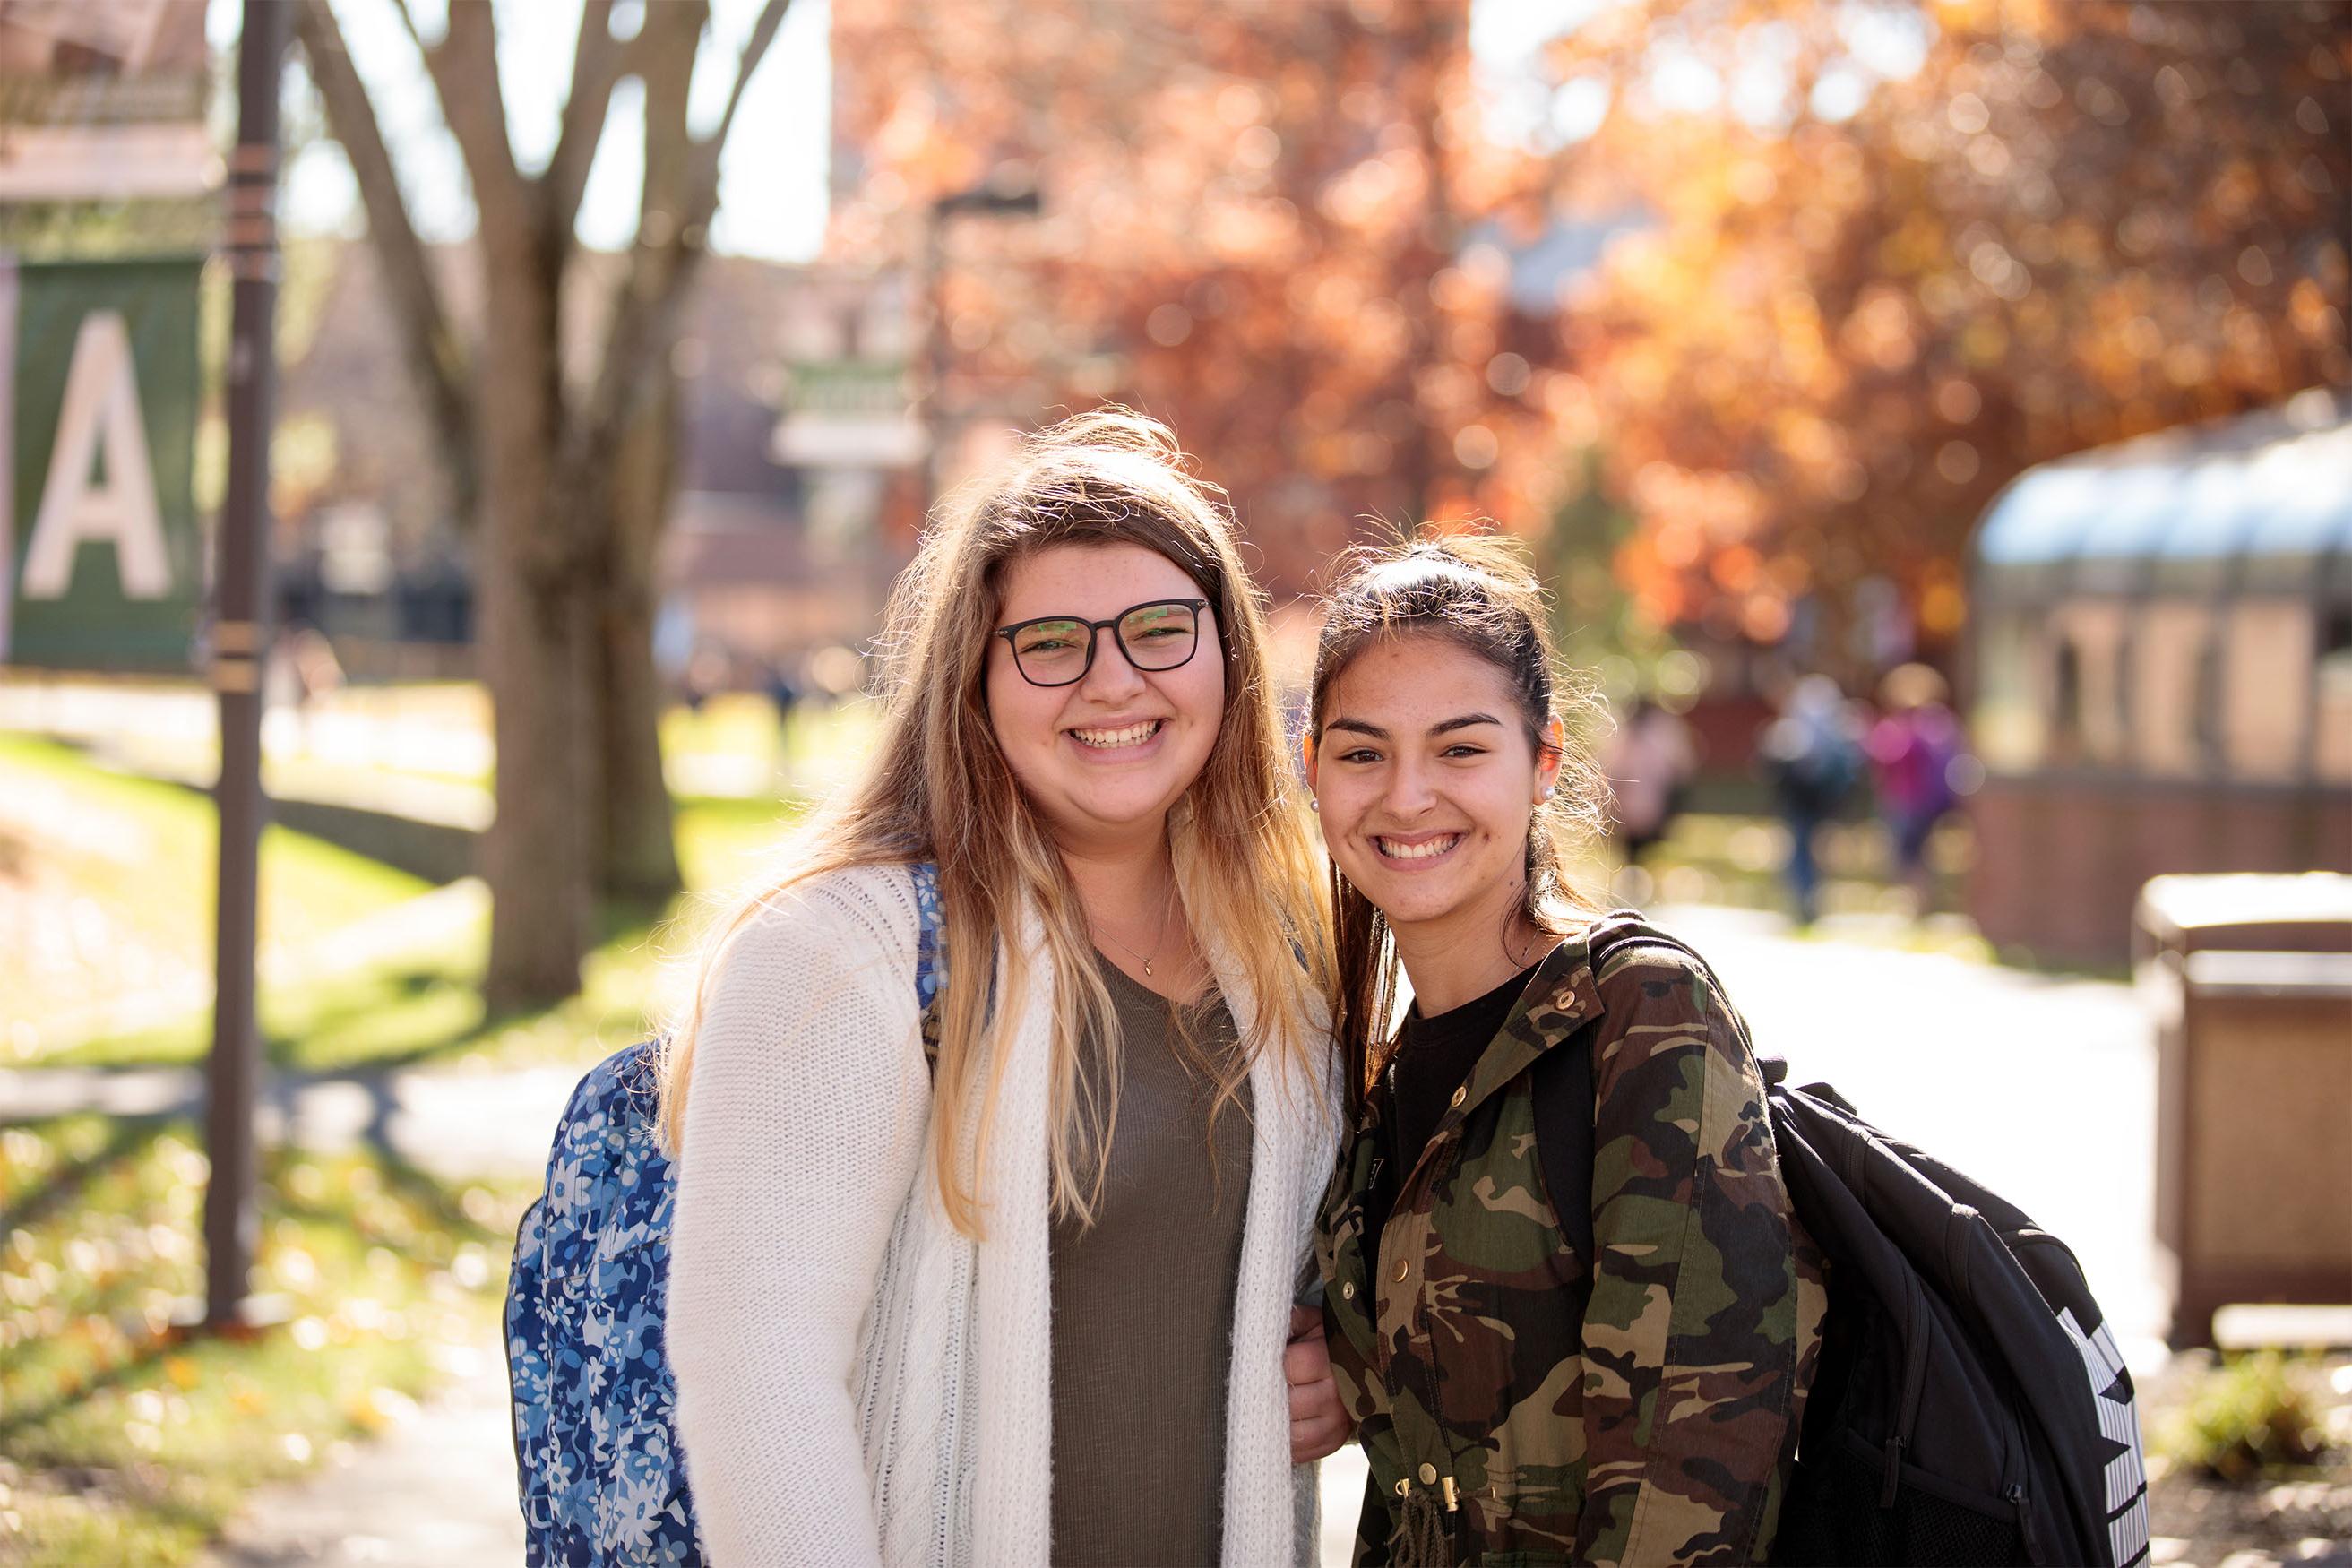 Students on the Fall River campus